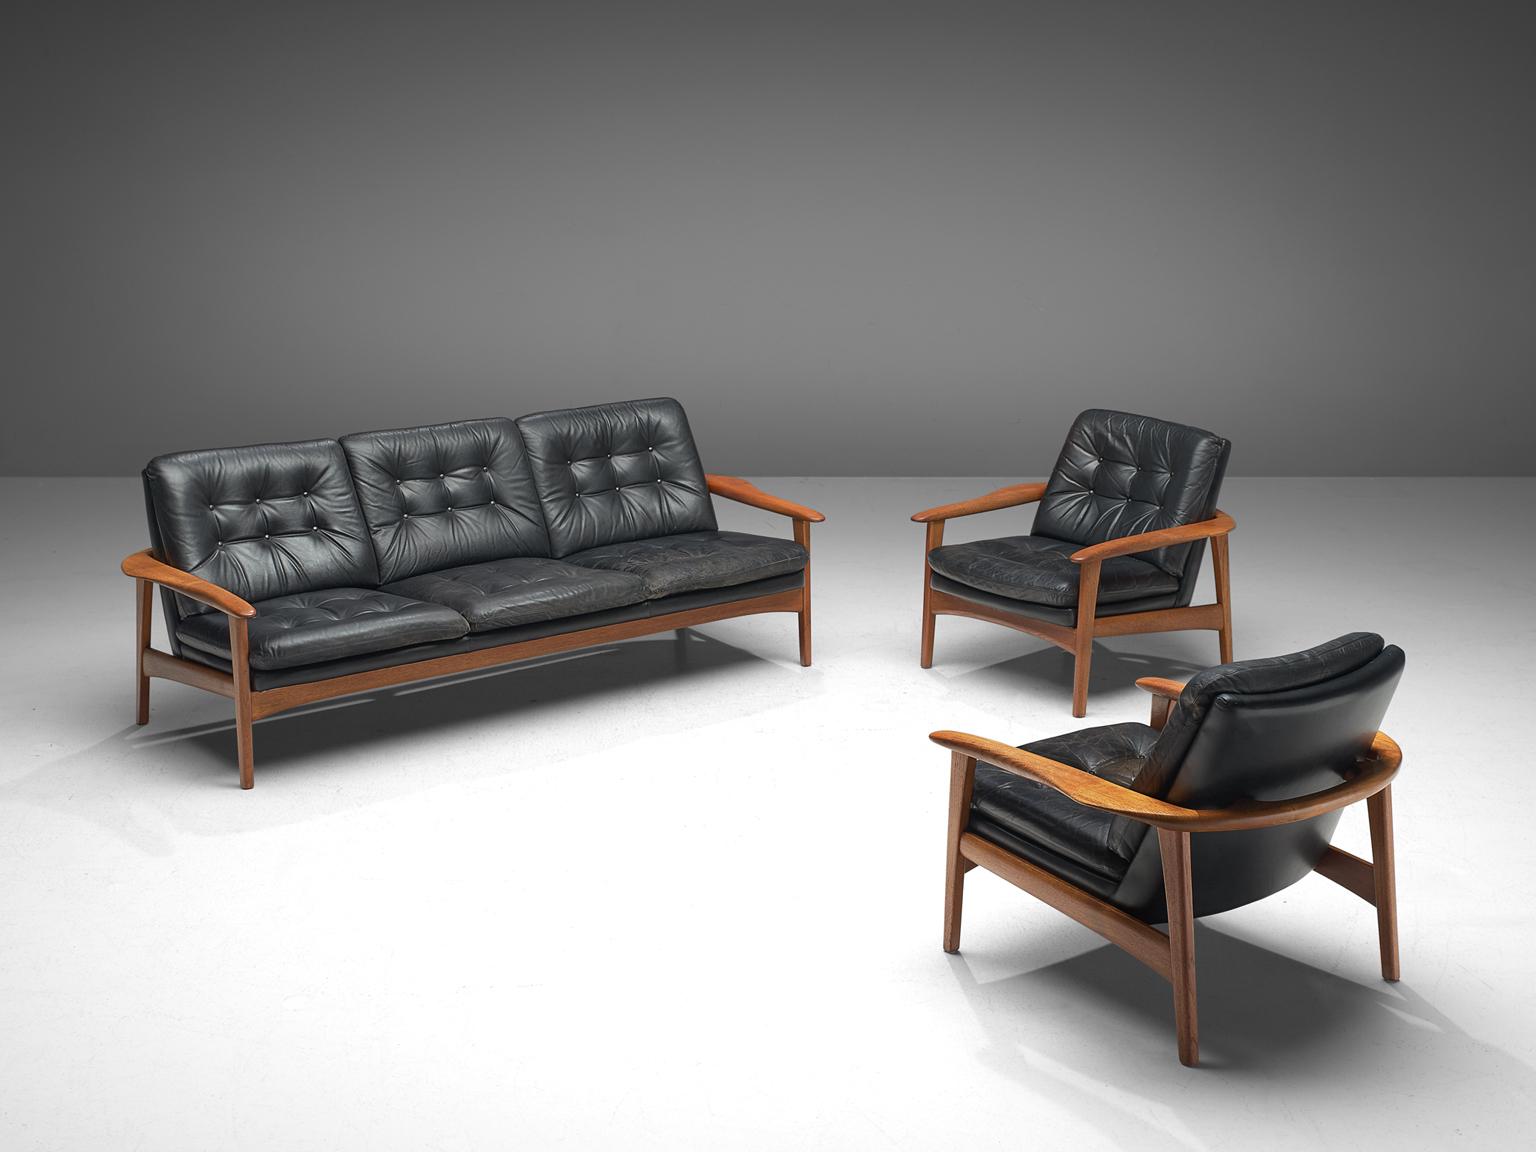 Pair of easy chairs and settee, black leather and teak, Denmark, 1960s.

This set of easy chairs and sofa feature a teak frame with a tufted seat and back. The chairs have a sturdy frame showing refined craftsmanship, holding a comfortable leather